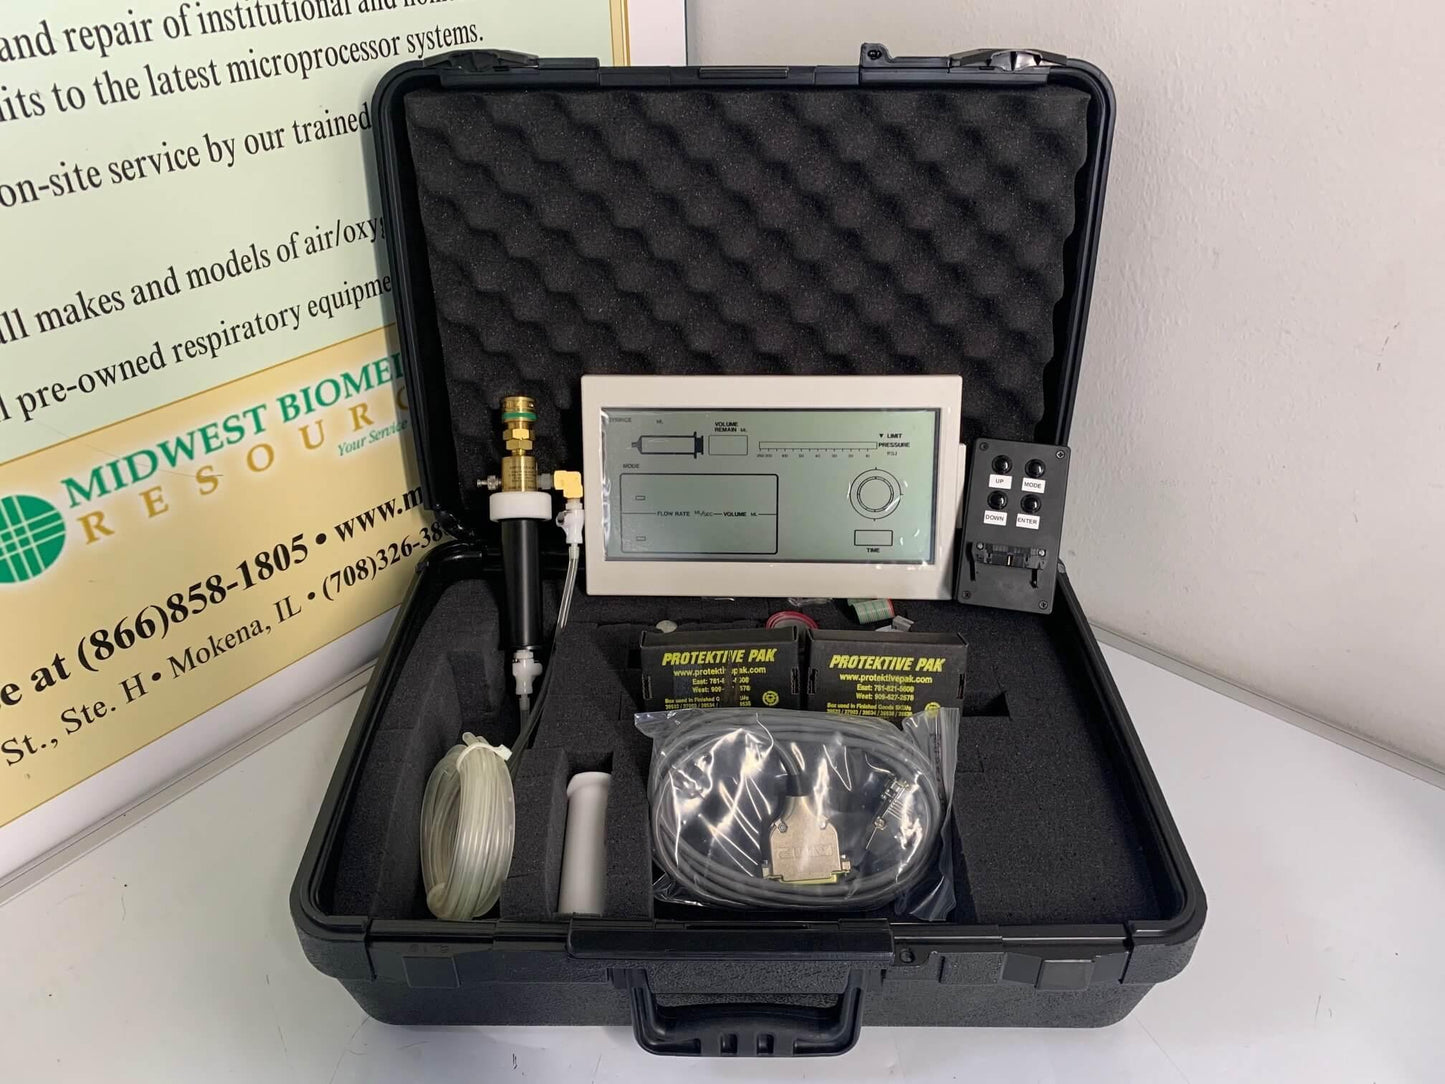 NEW Angiomat Illumena Optistar Pressure Calibration Fixture with Warranty & FREE Shipping - MBR Medicals